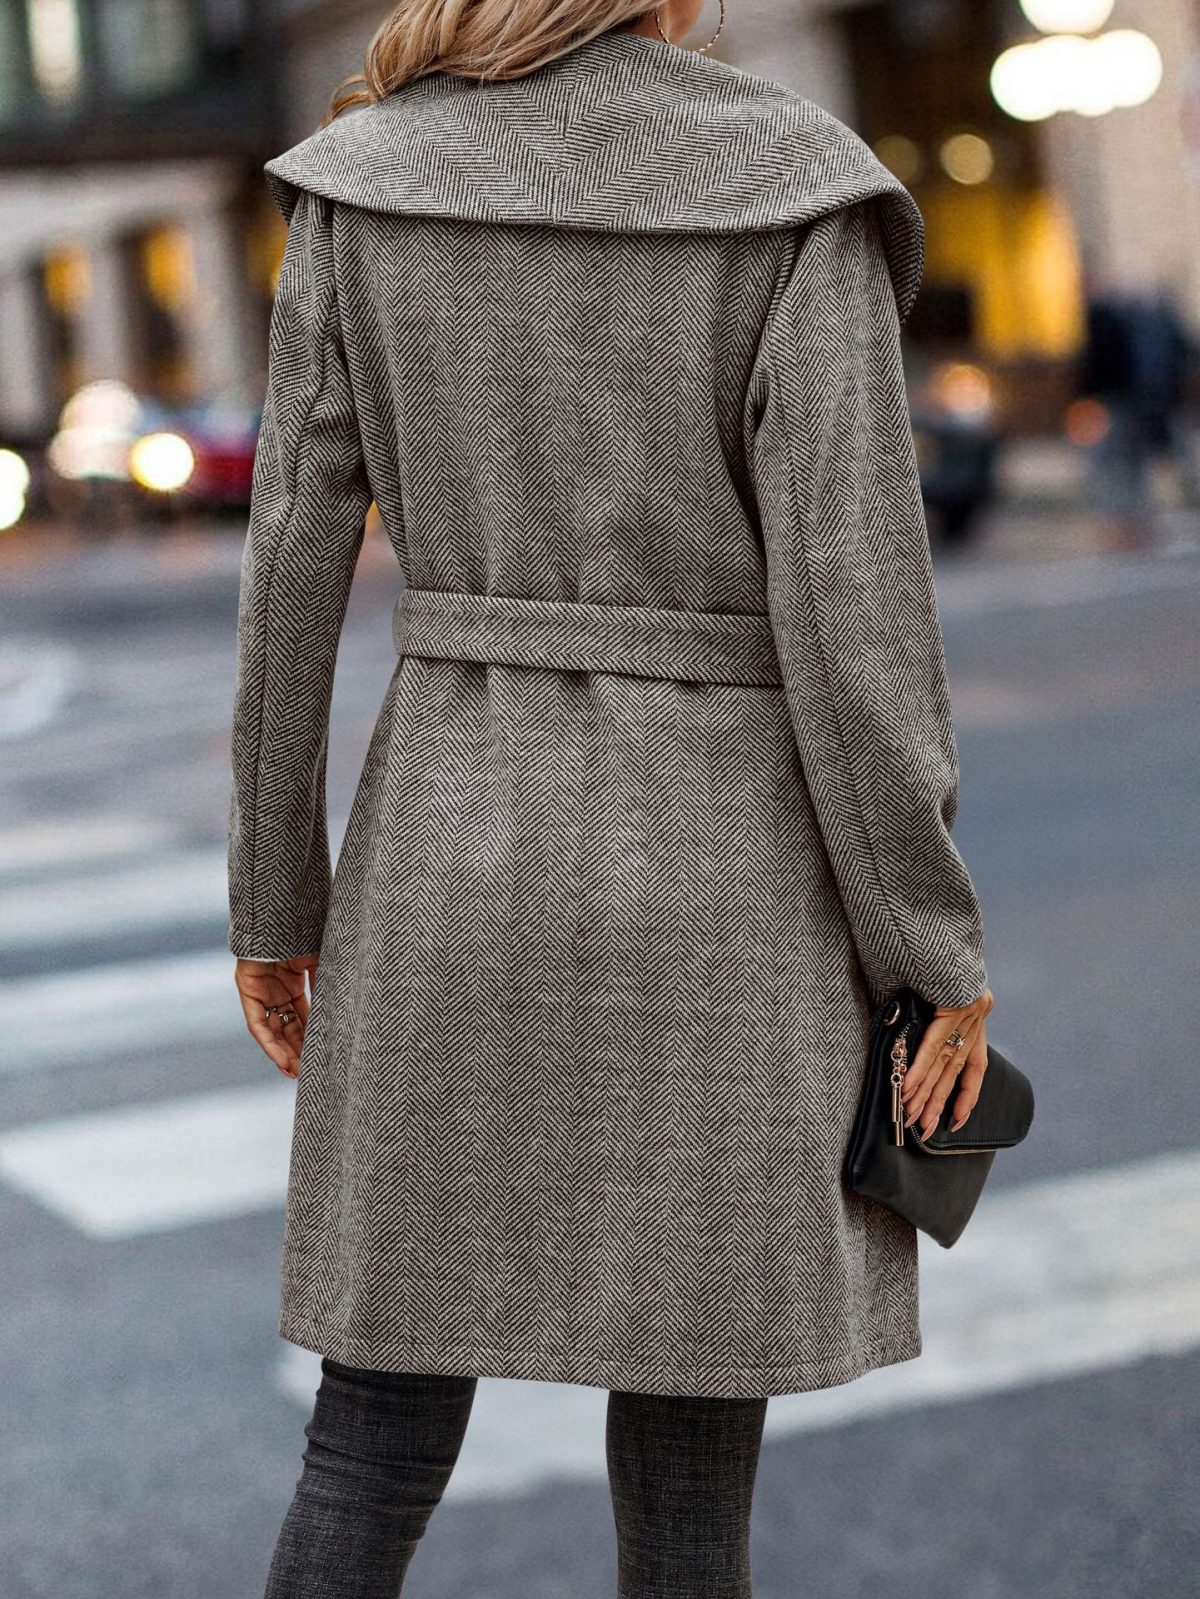 Autumn Winter Fur Plaid Solid Color Long Sleeve Collared Belt Slimming Women Coat in Coats & Jackets